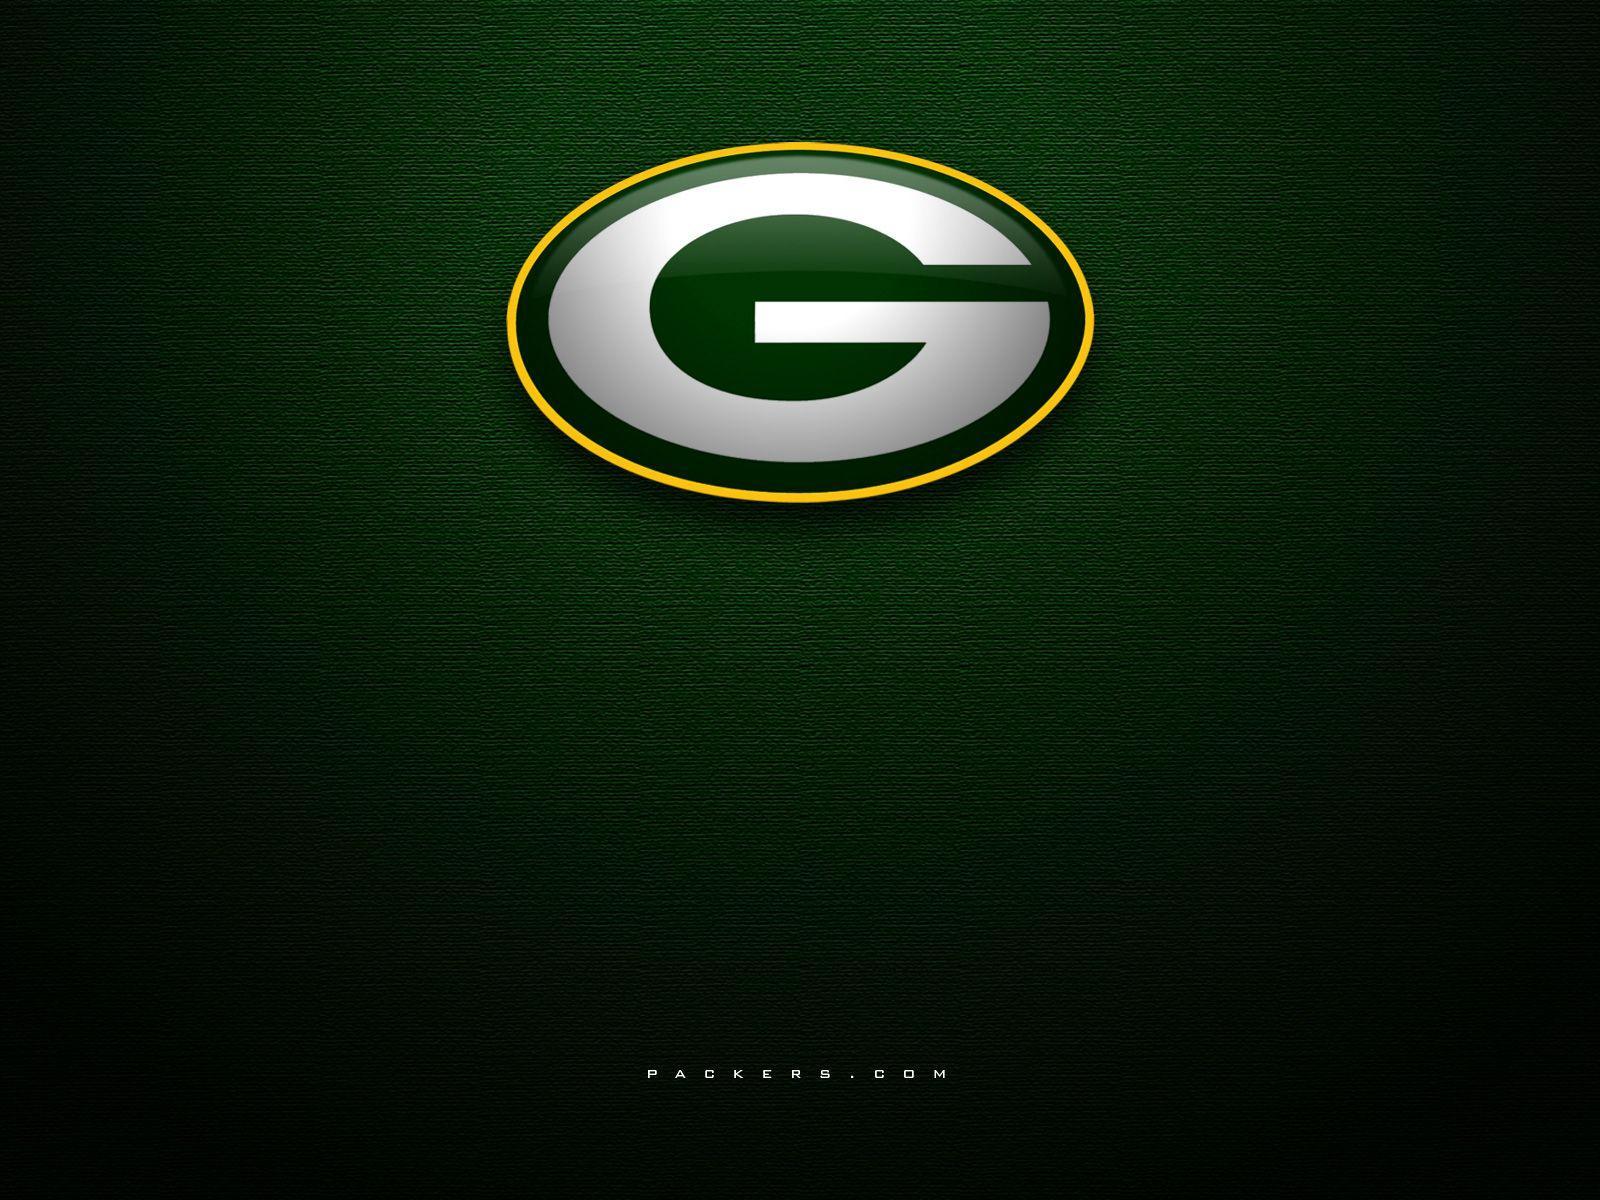 Packers Fan Wallpapers Contest Winners Announced